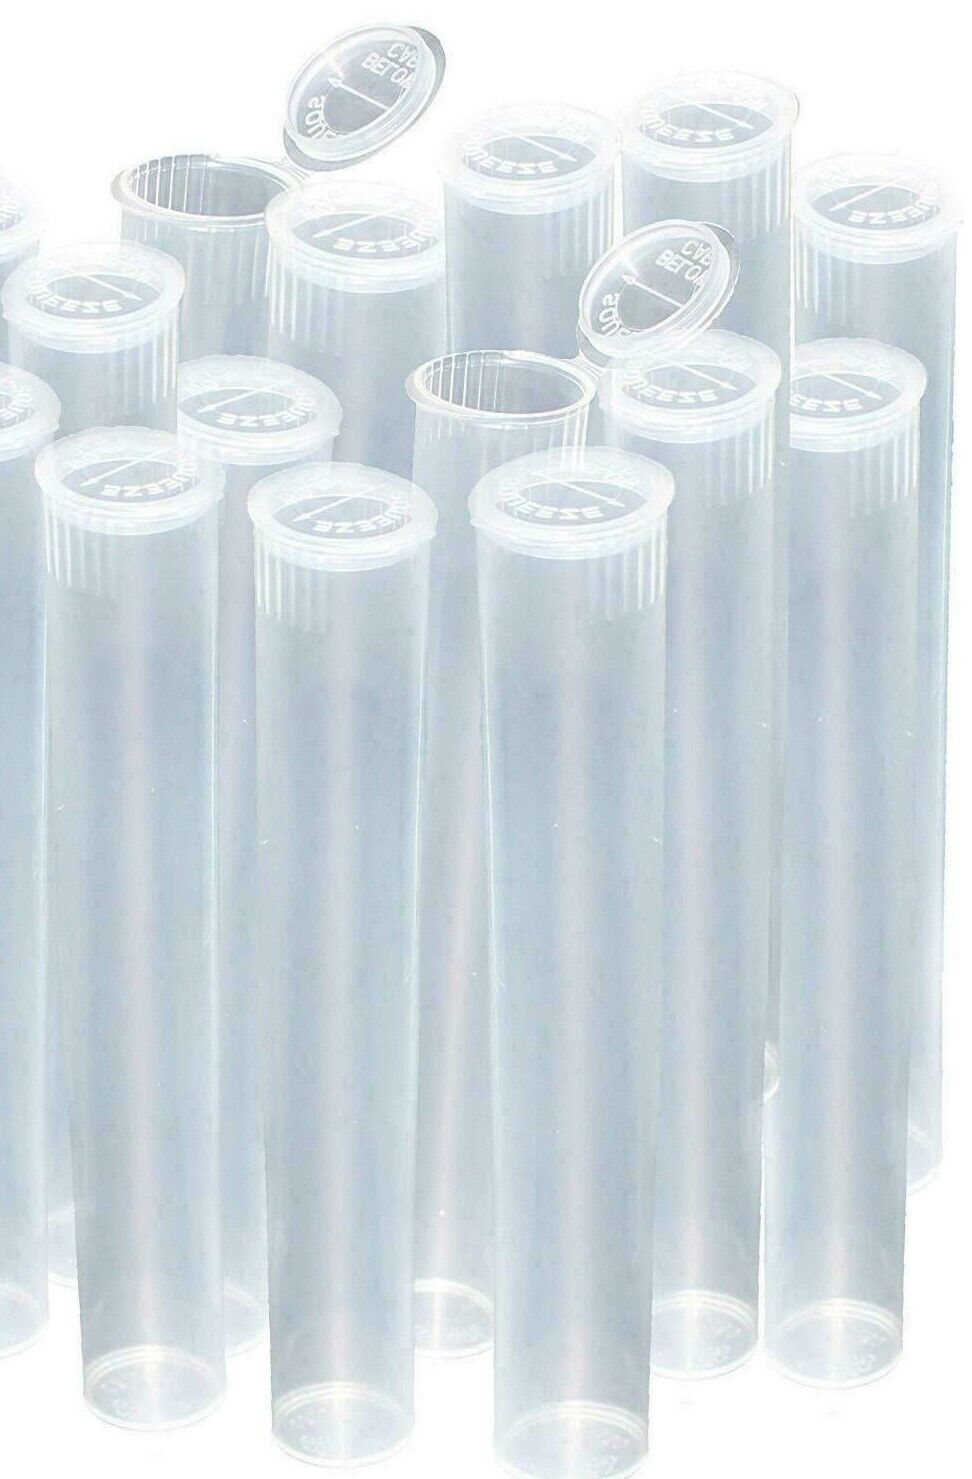 25- W Gallery 116MM Clear Doob Tubes for Storing King Size Cones